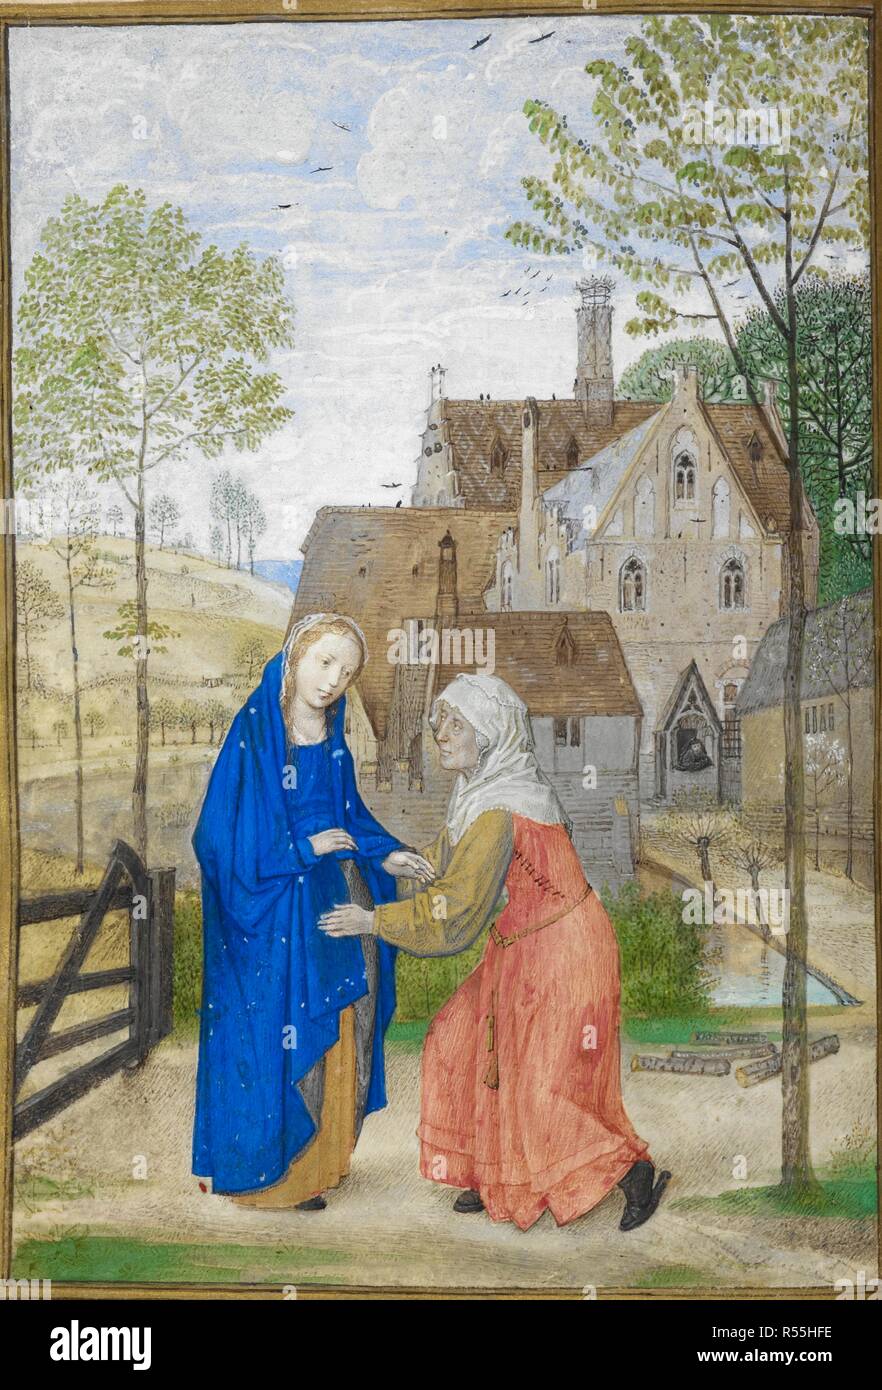 Office of Lauds. The Visitation. Mary and Elizabeth in the garden of a country house. Book of Hours, Use of Rome (The 'Huth Hours'). S. Netherlands [Bruges], France [probably Valenciennes]; 1485-1490. Source: Add. 38126, f.66v. Language: Latin with additions in Latin, French and Italian. Stock Photo